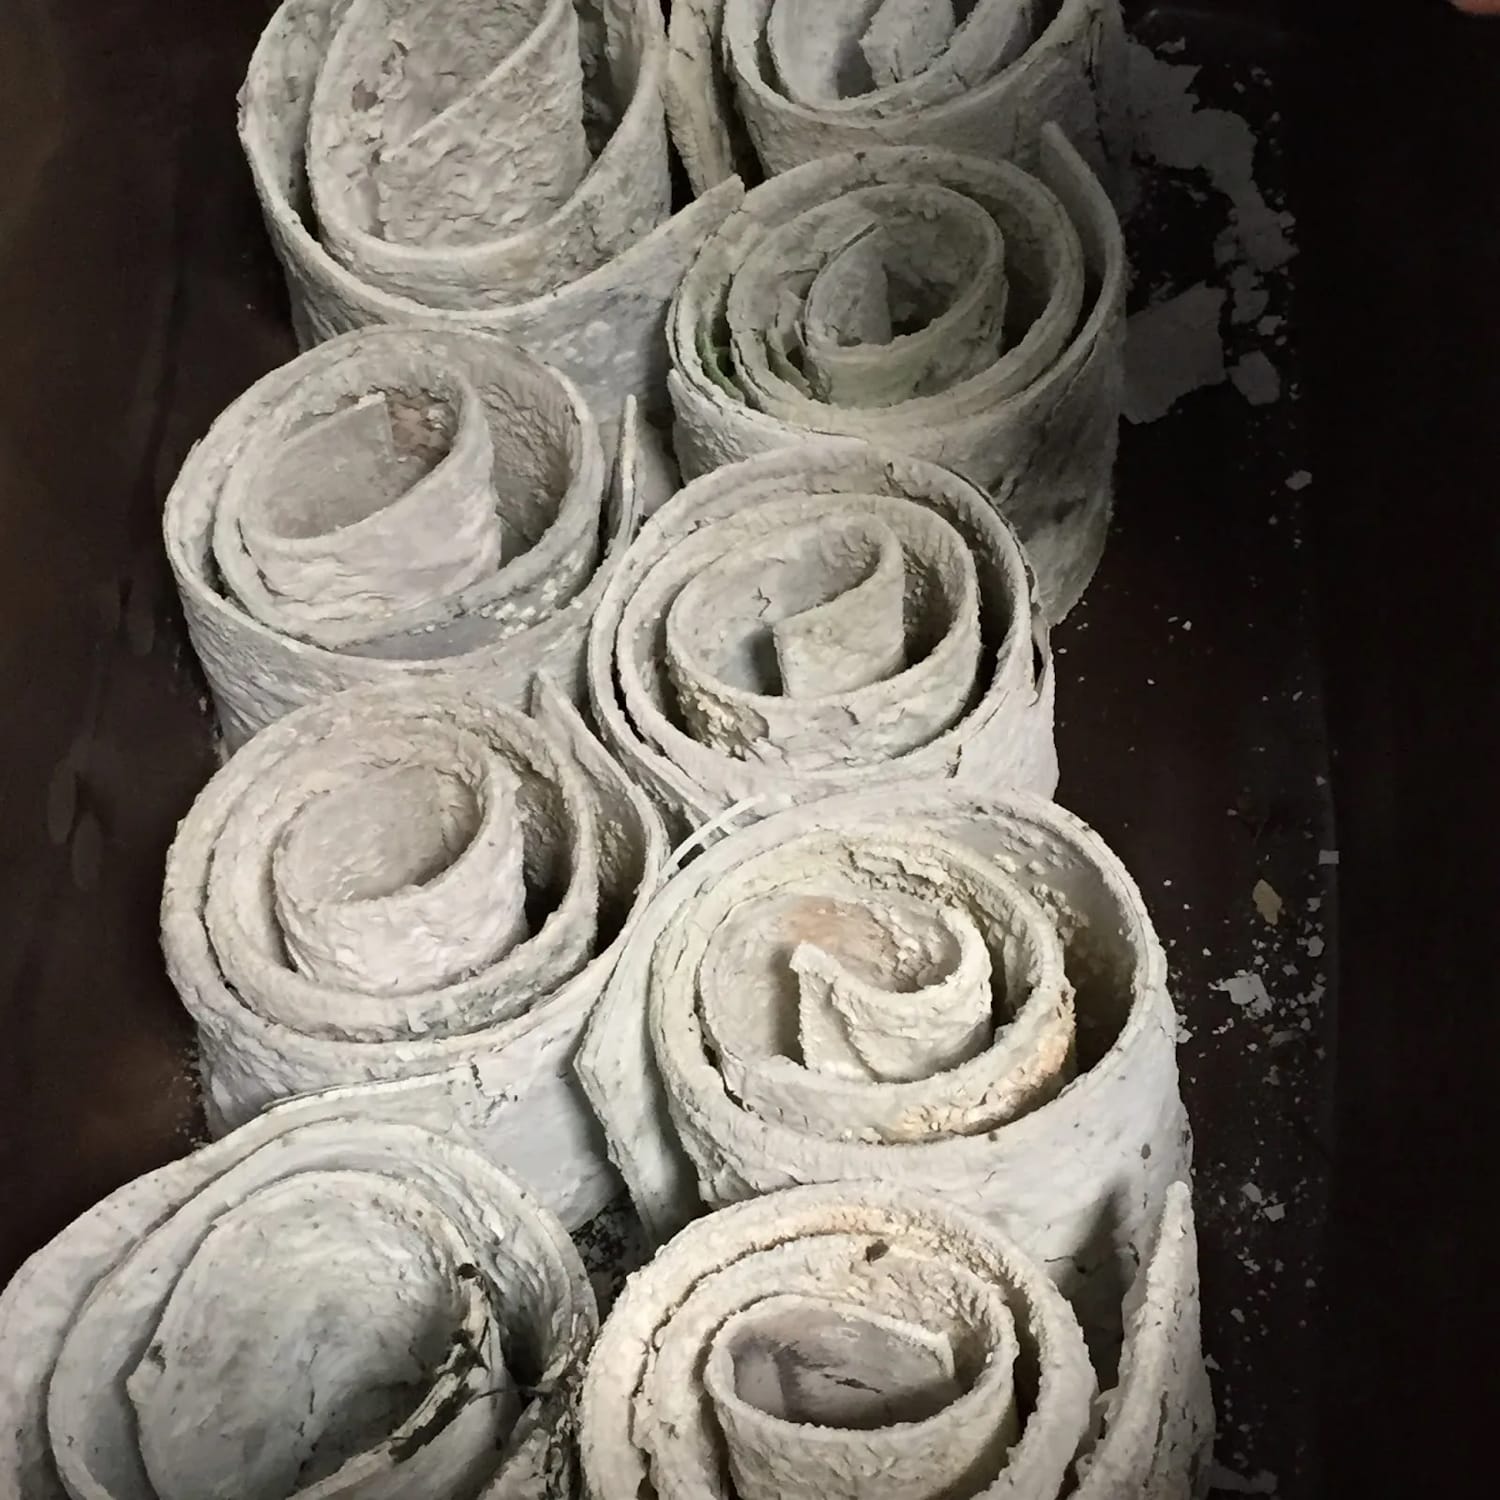 View of the tops of rolled sheets of leads, with a rough plaster-like appearance, and forming spiral shapes.